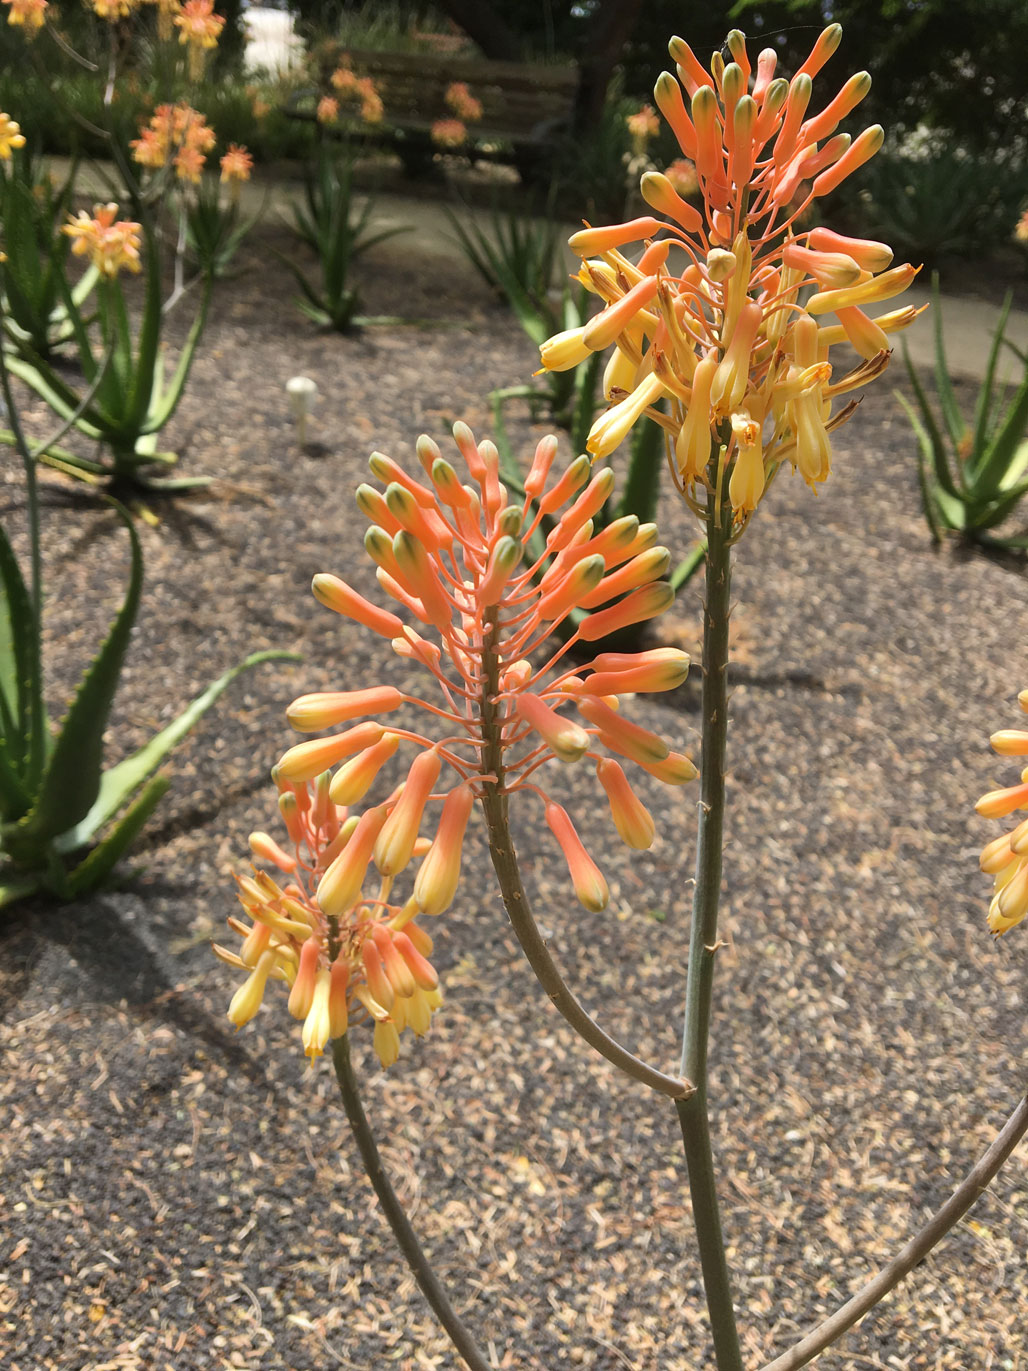 The coral flowers of Nubian Aloe.